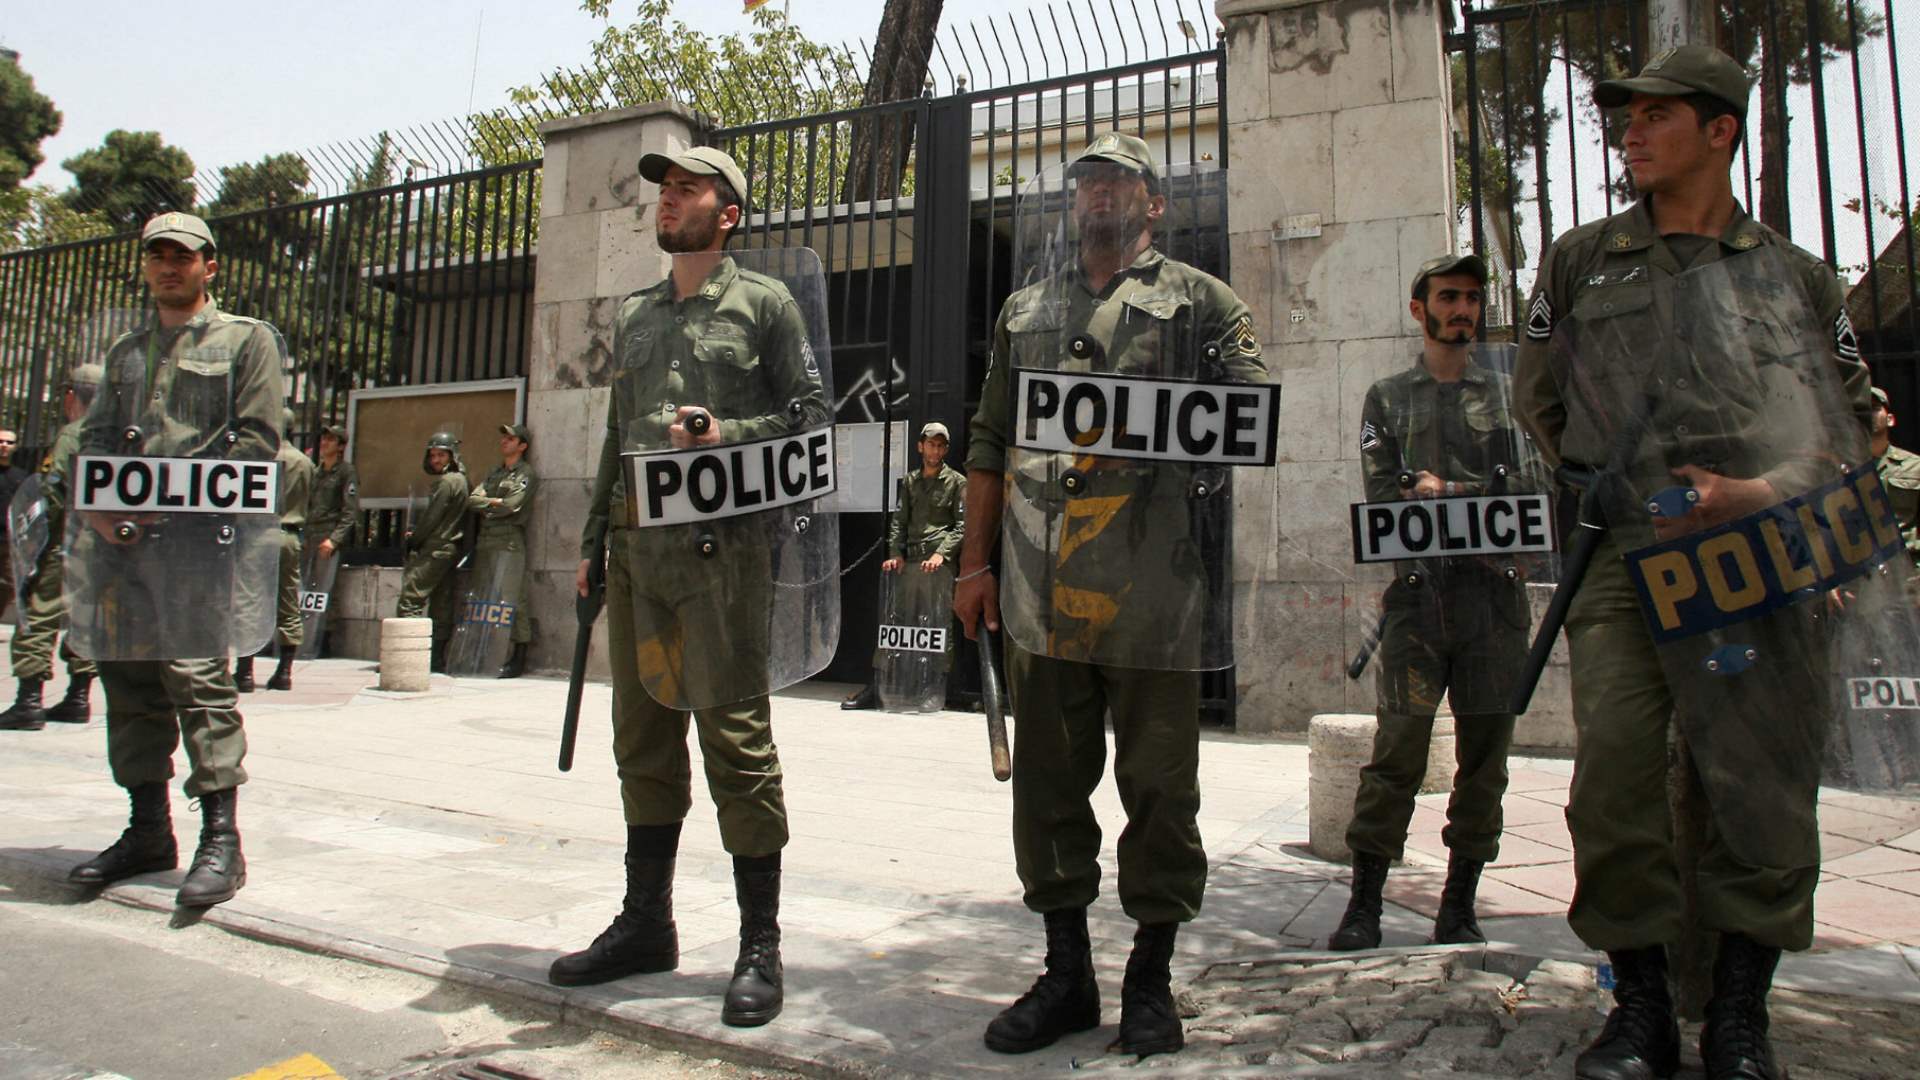 Armed man killed in attempt to plant bomb targeting police forces in Iran